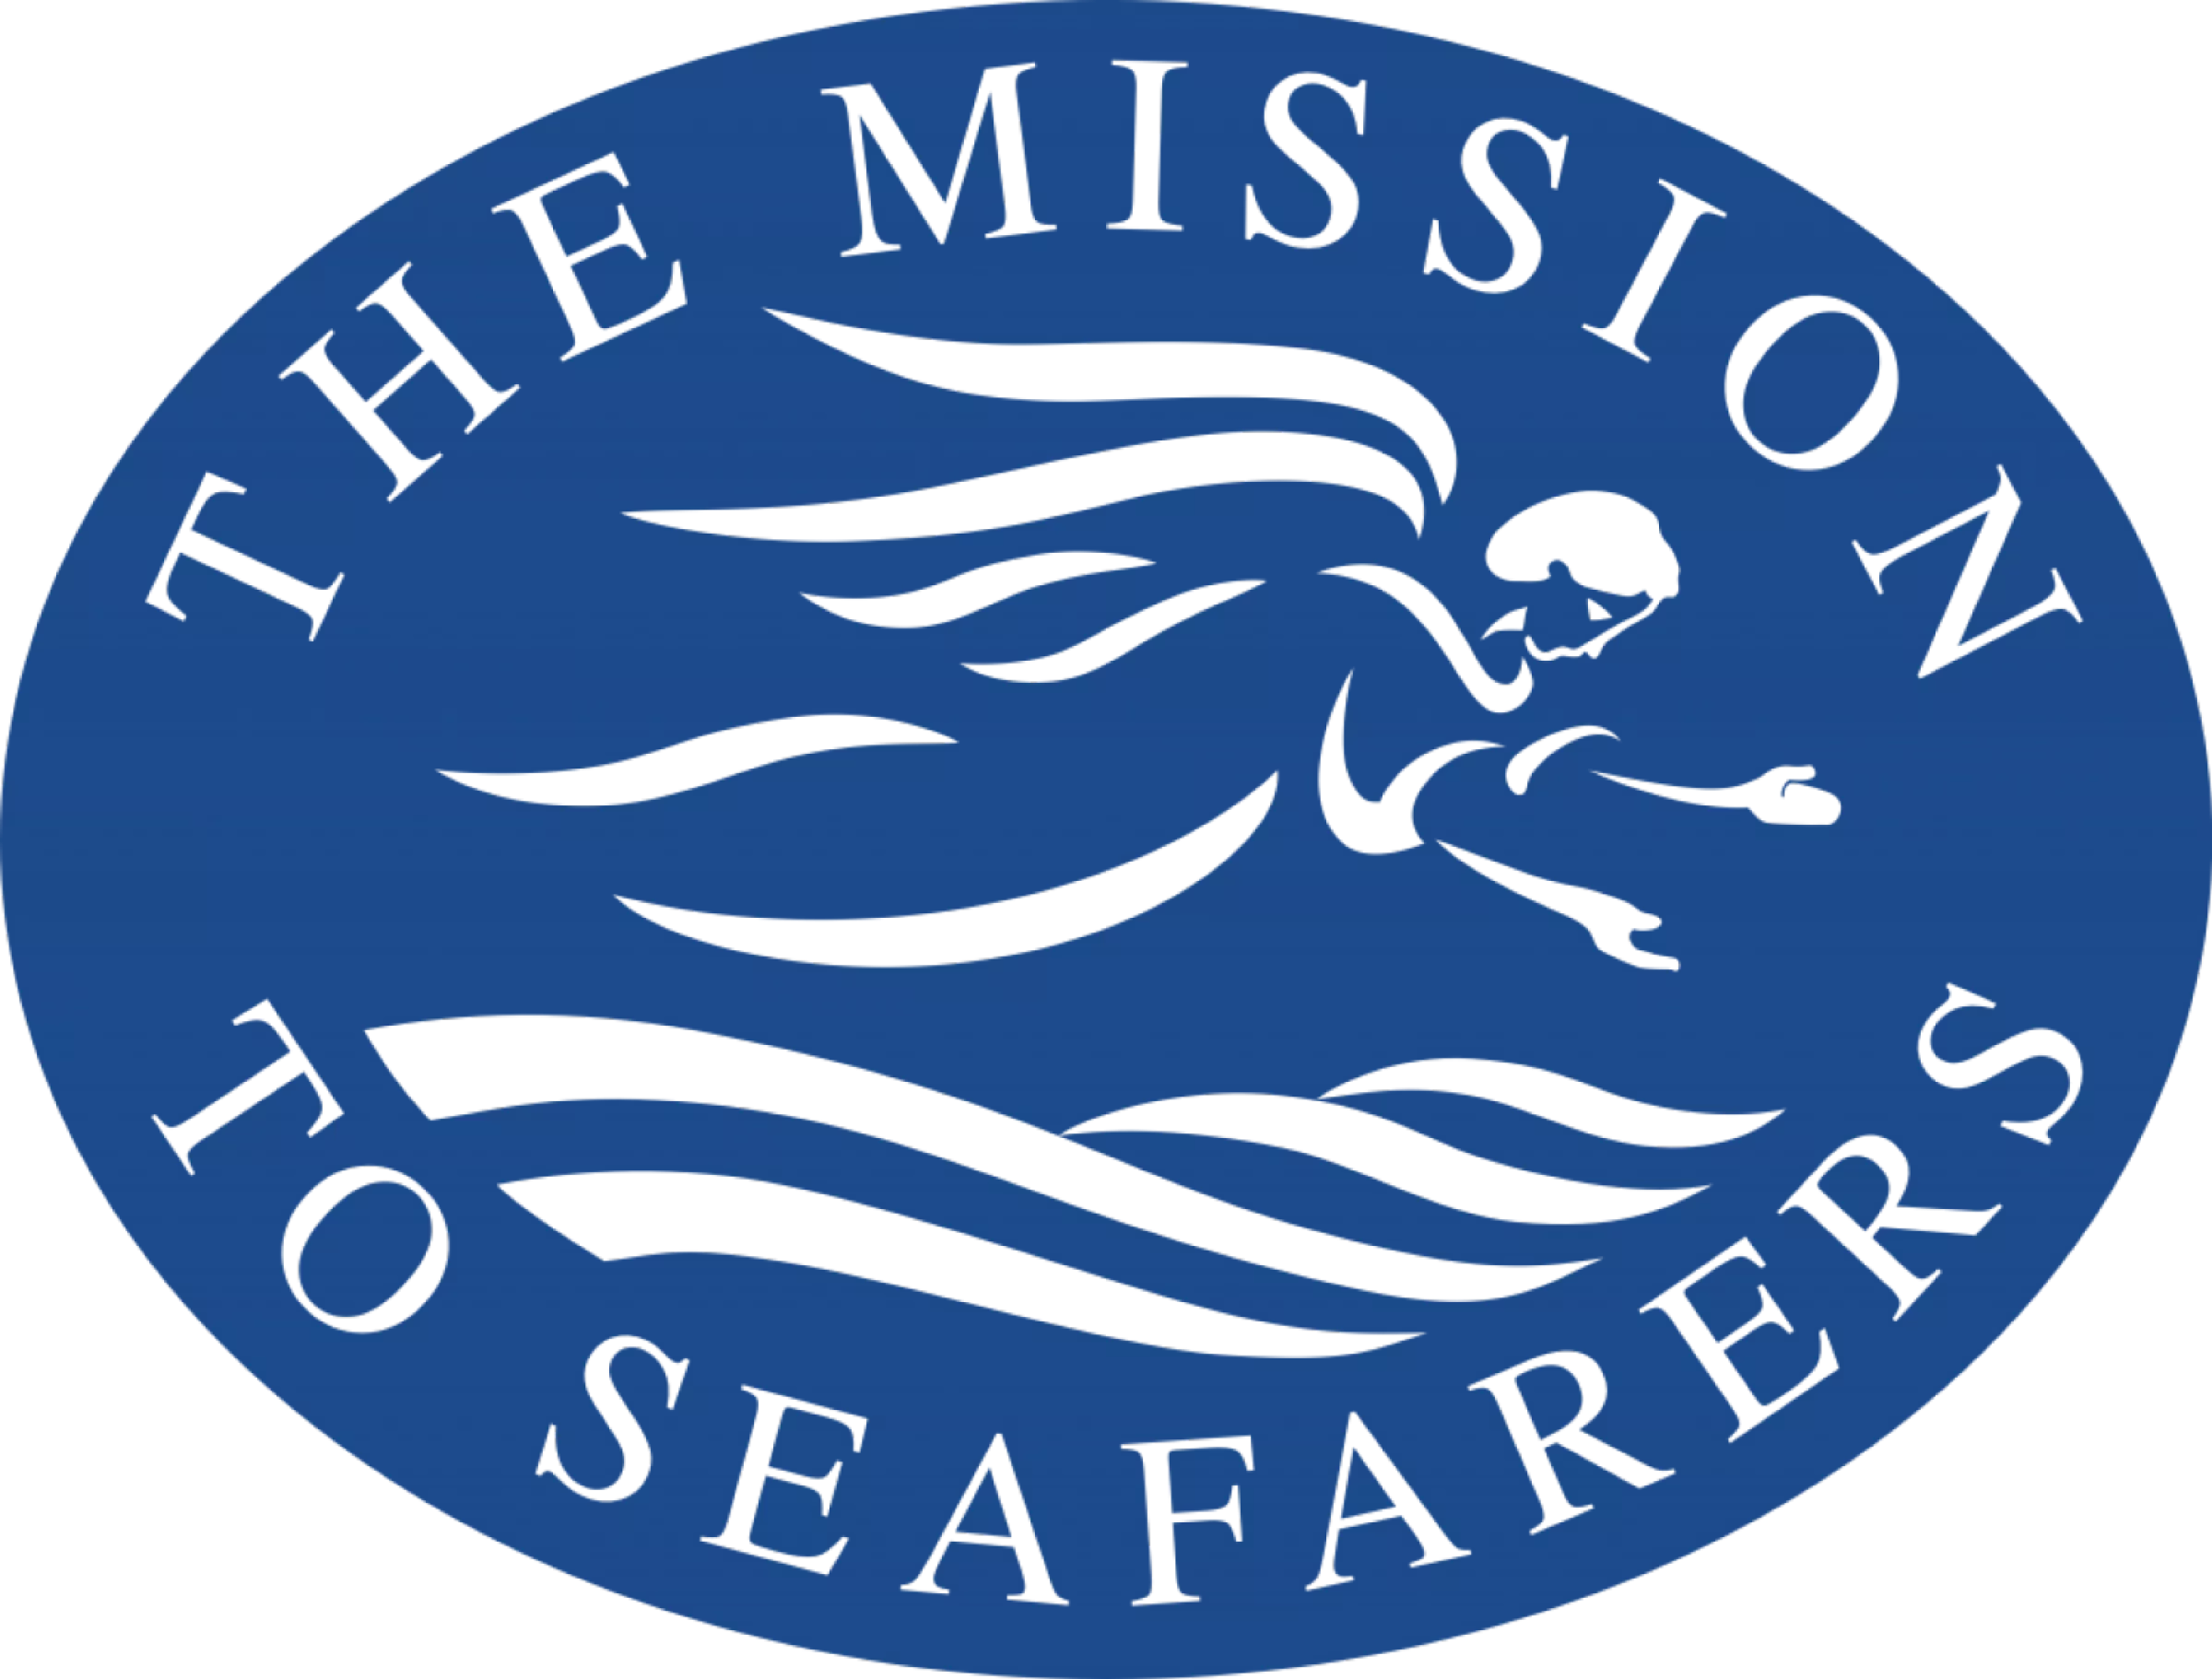 The Mission to Seafarers logo